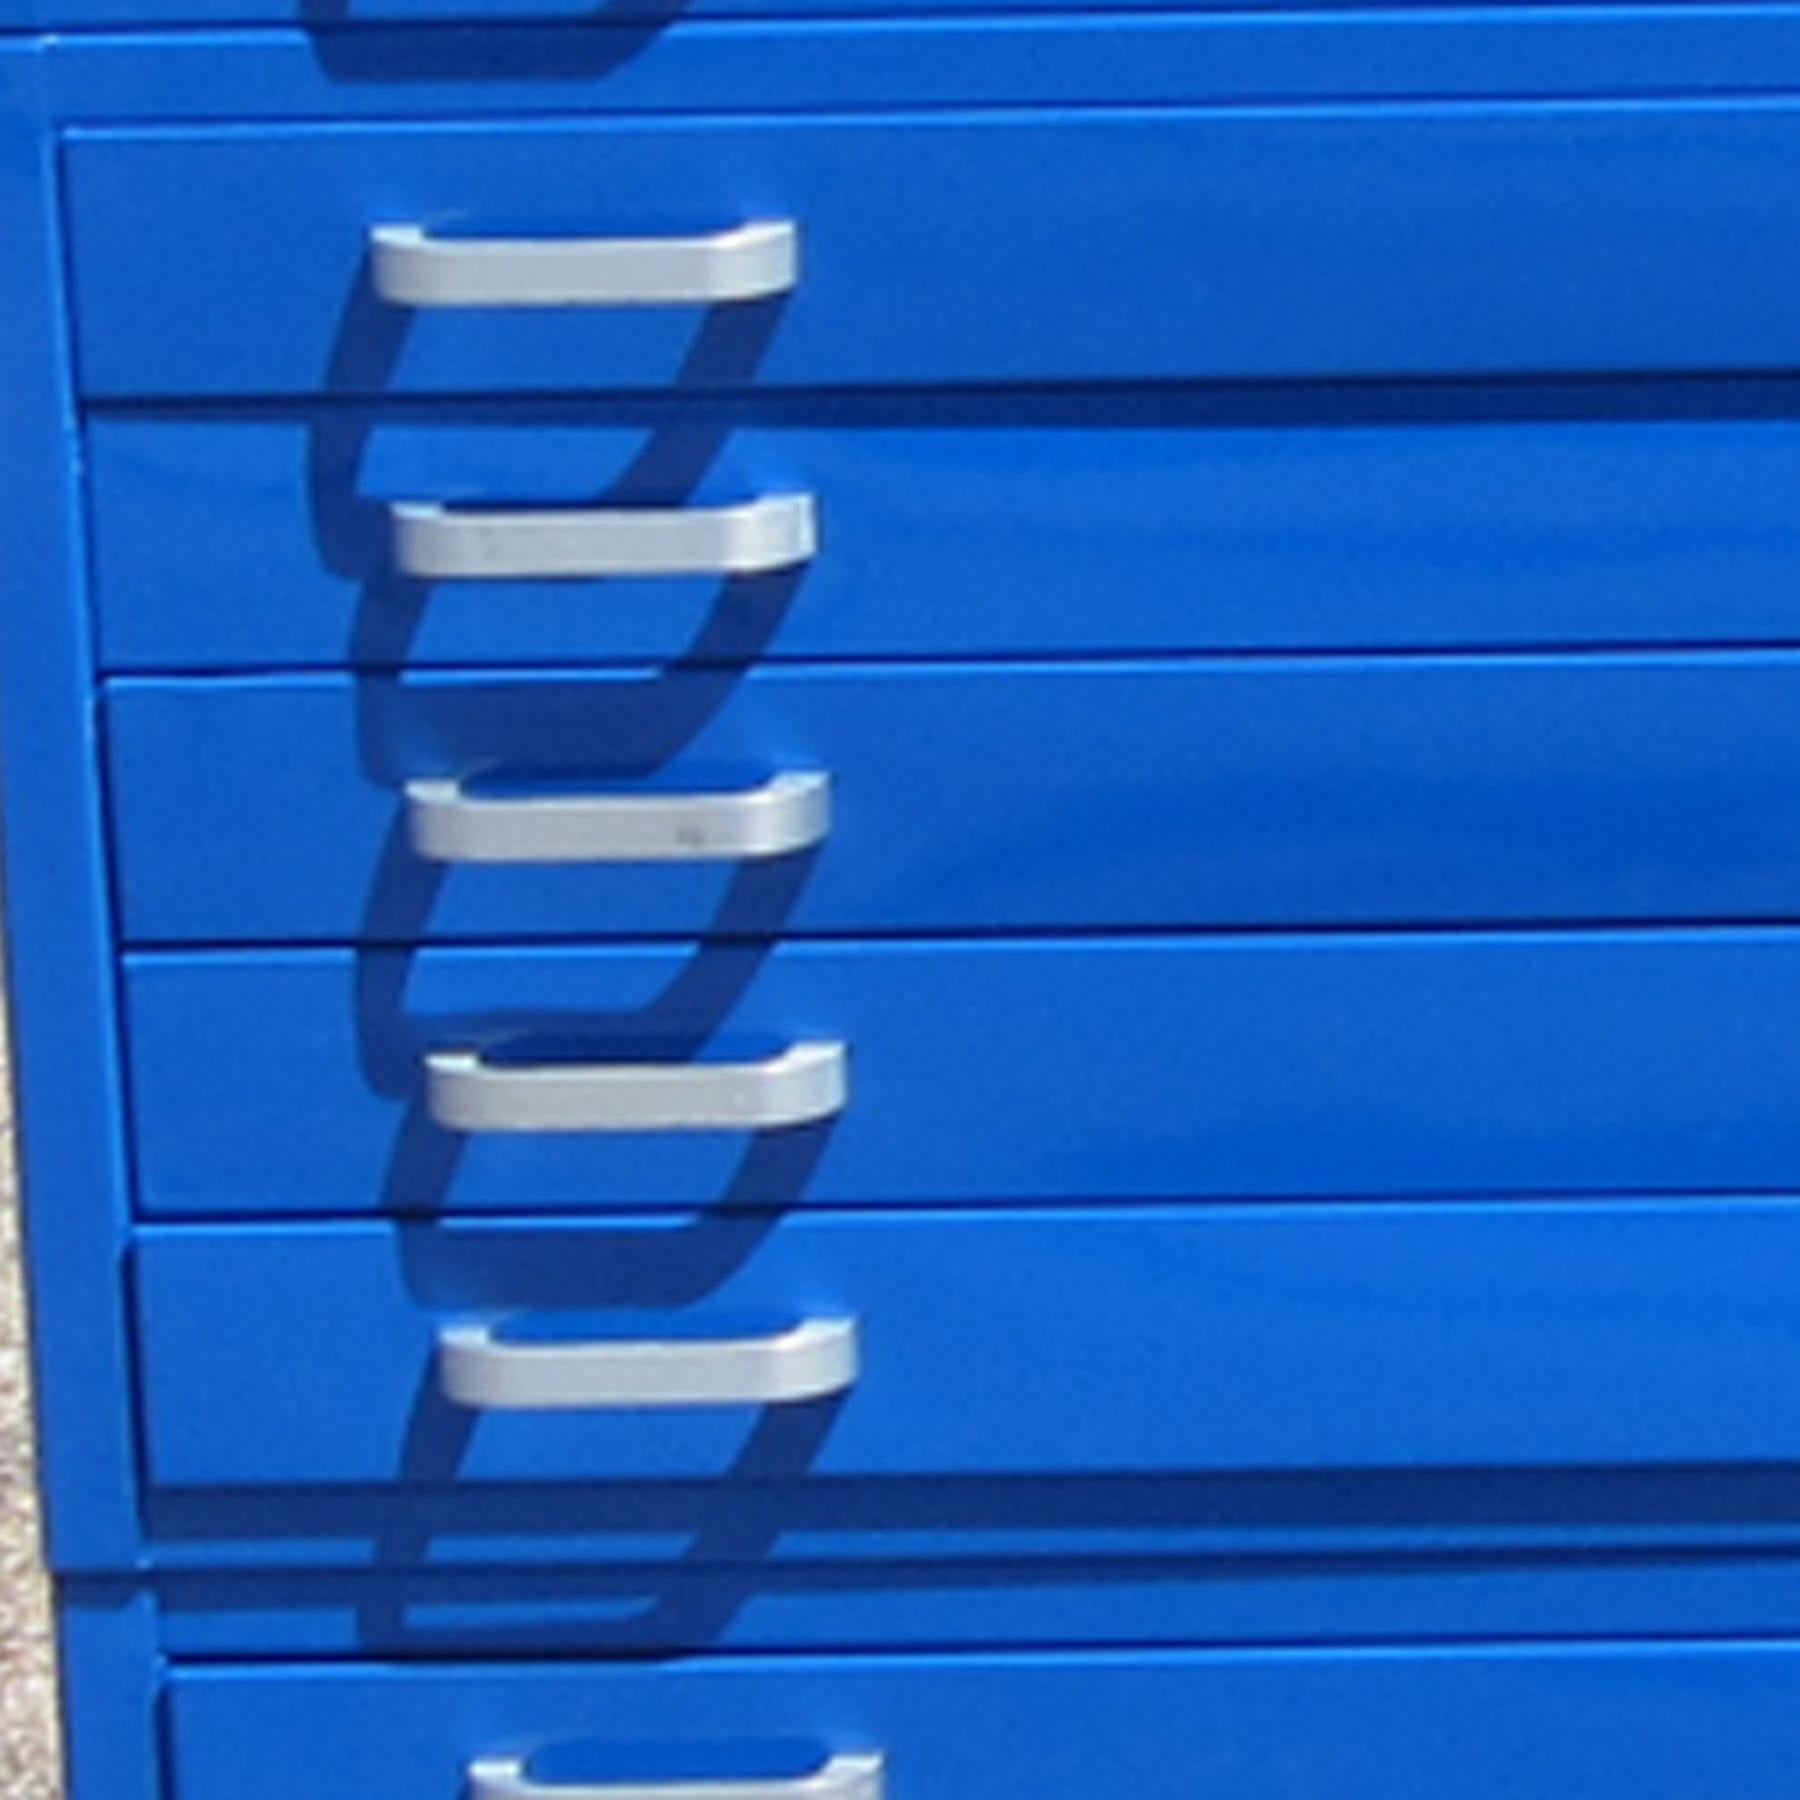 A vintage 2 stack flat file by Kranco Co. Inc in a blue finish. This architectural office piece is both stylish, useful and high-quality. With metal drawer pulls and easy sliding action.